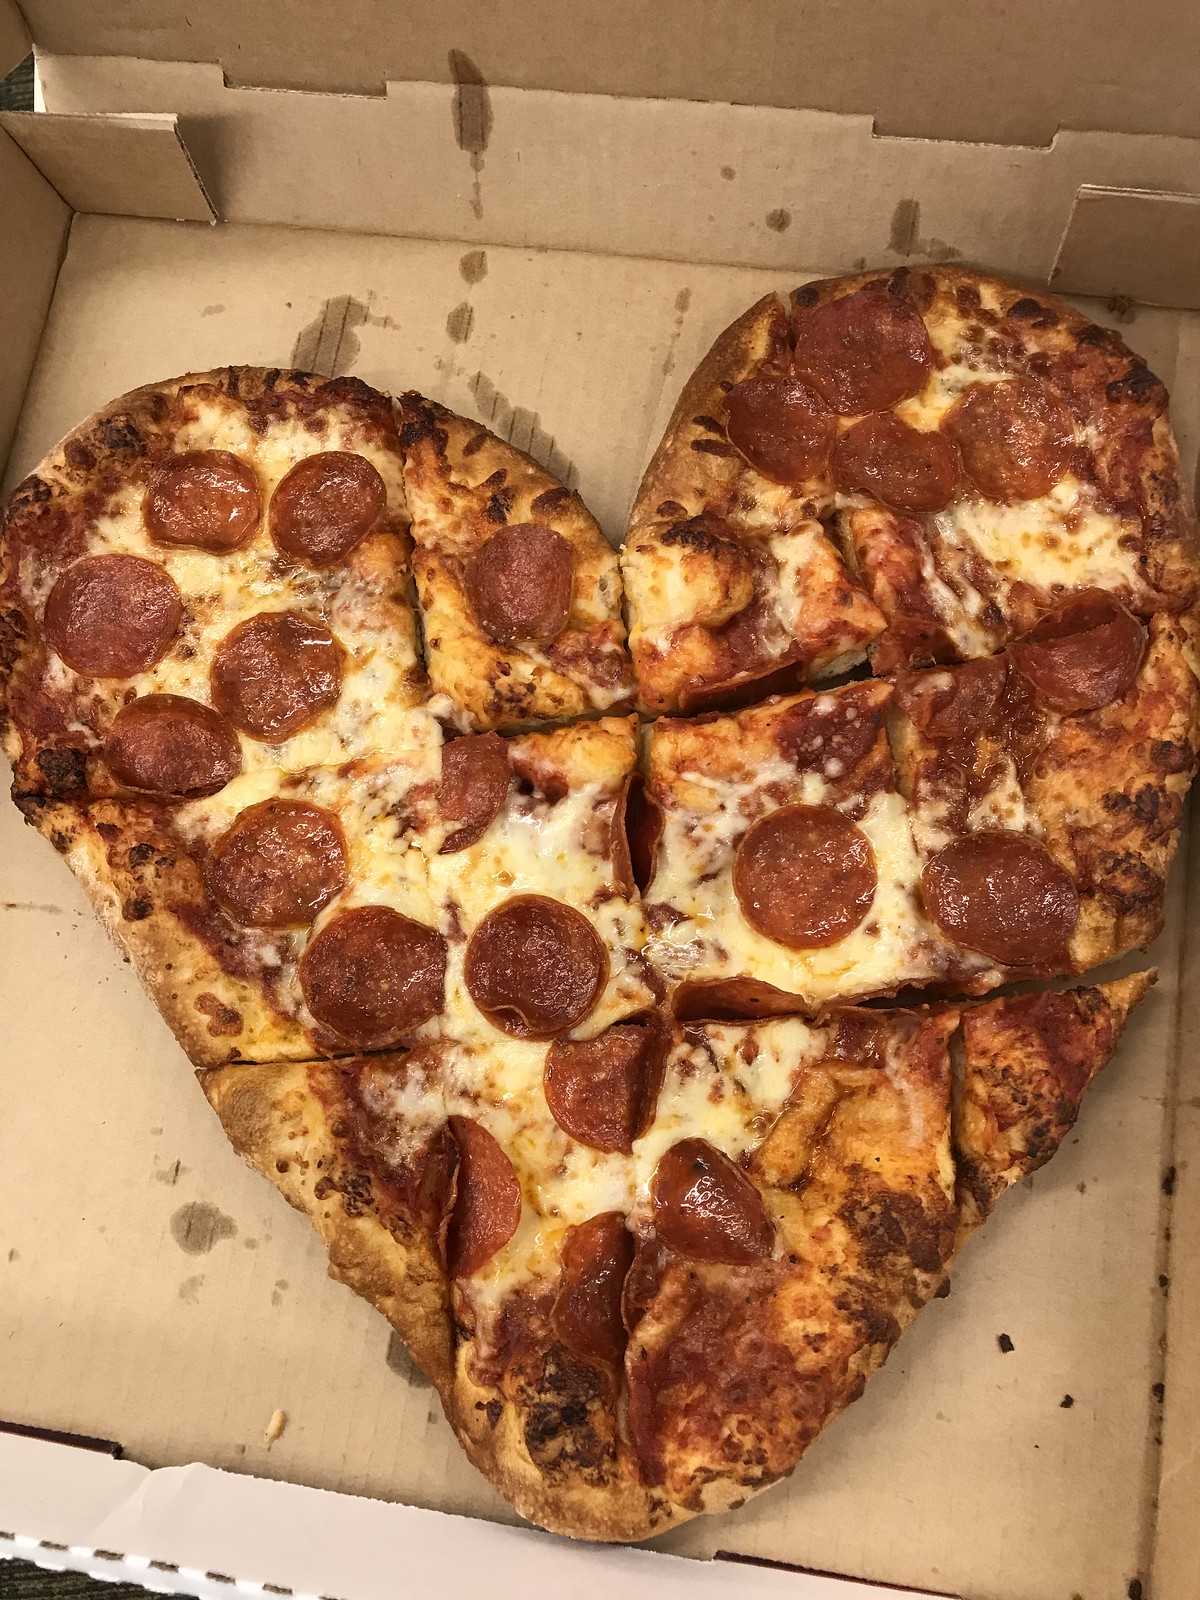 Husson's Heart Shaped Pizza - Candace Lately